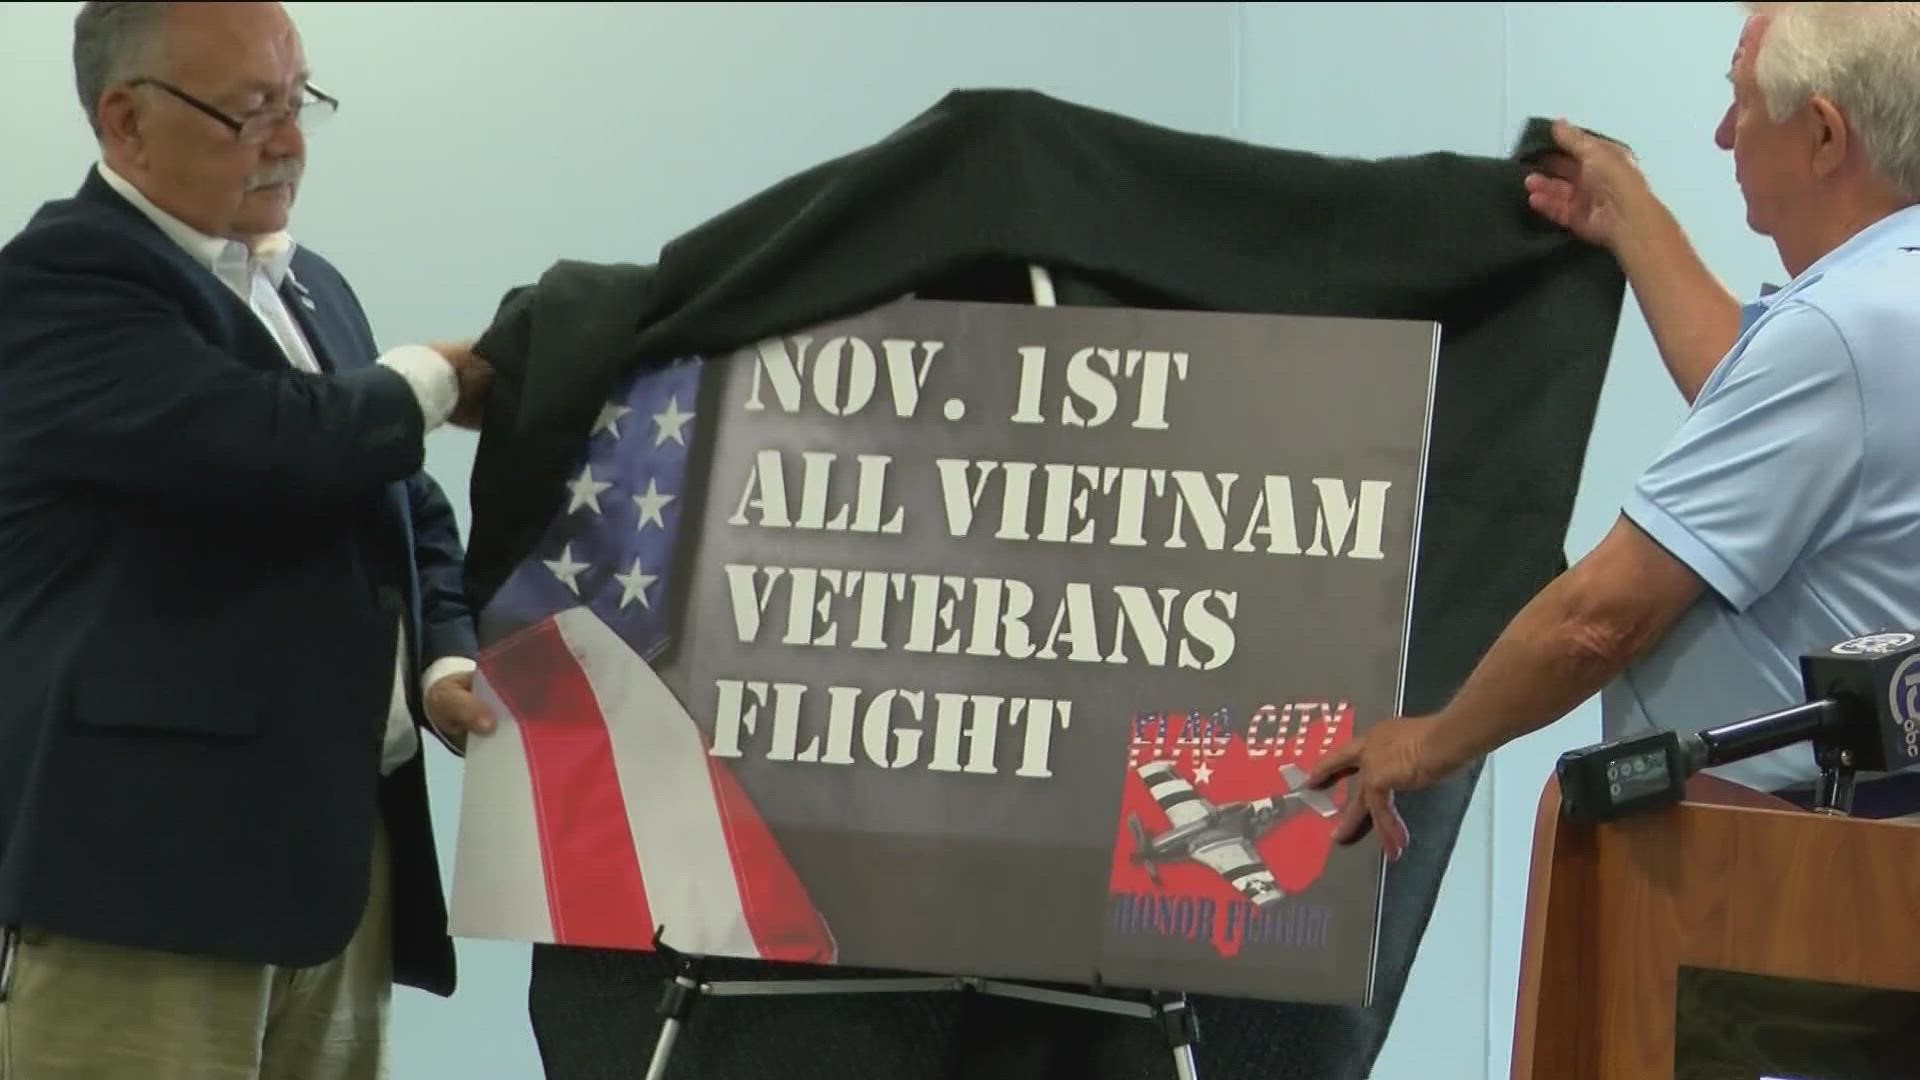 While Honor Flight usually gives priority to veterans of WWII and the Korean War, November's flight will be dedicated to those who served in Vietnam.